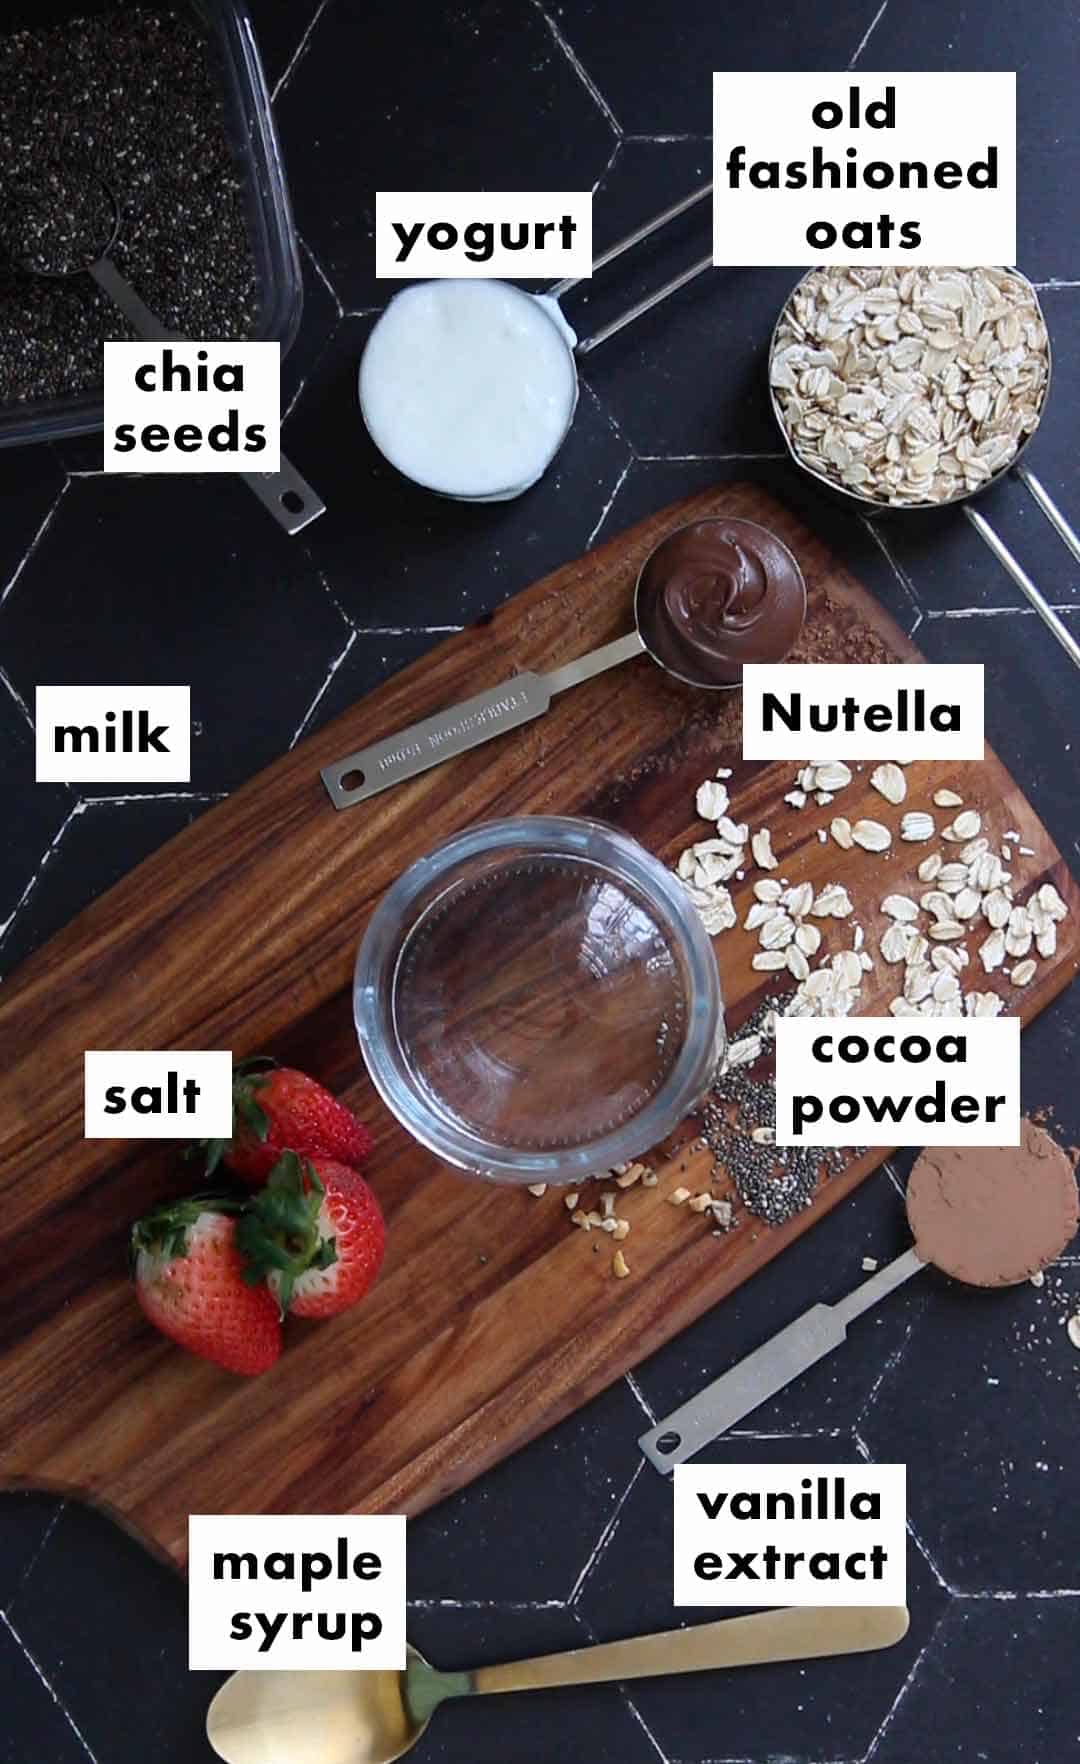 Nutella overnight oats ingredients: old fashioned oats, milk, whole milk plain yogurt, maple syrup, Nutella, chia cheese, vanilla extract, cocoa powder, and salt.